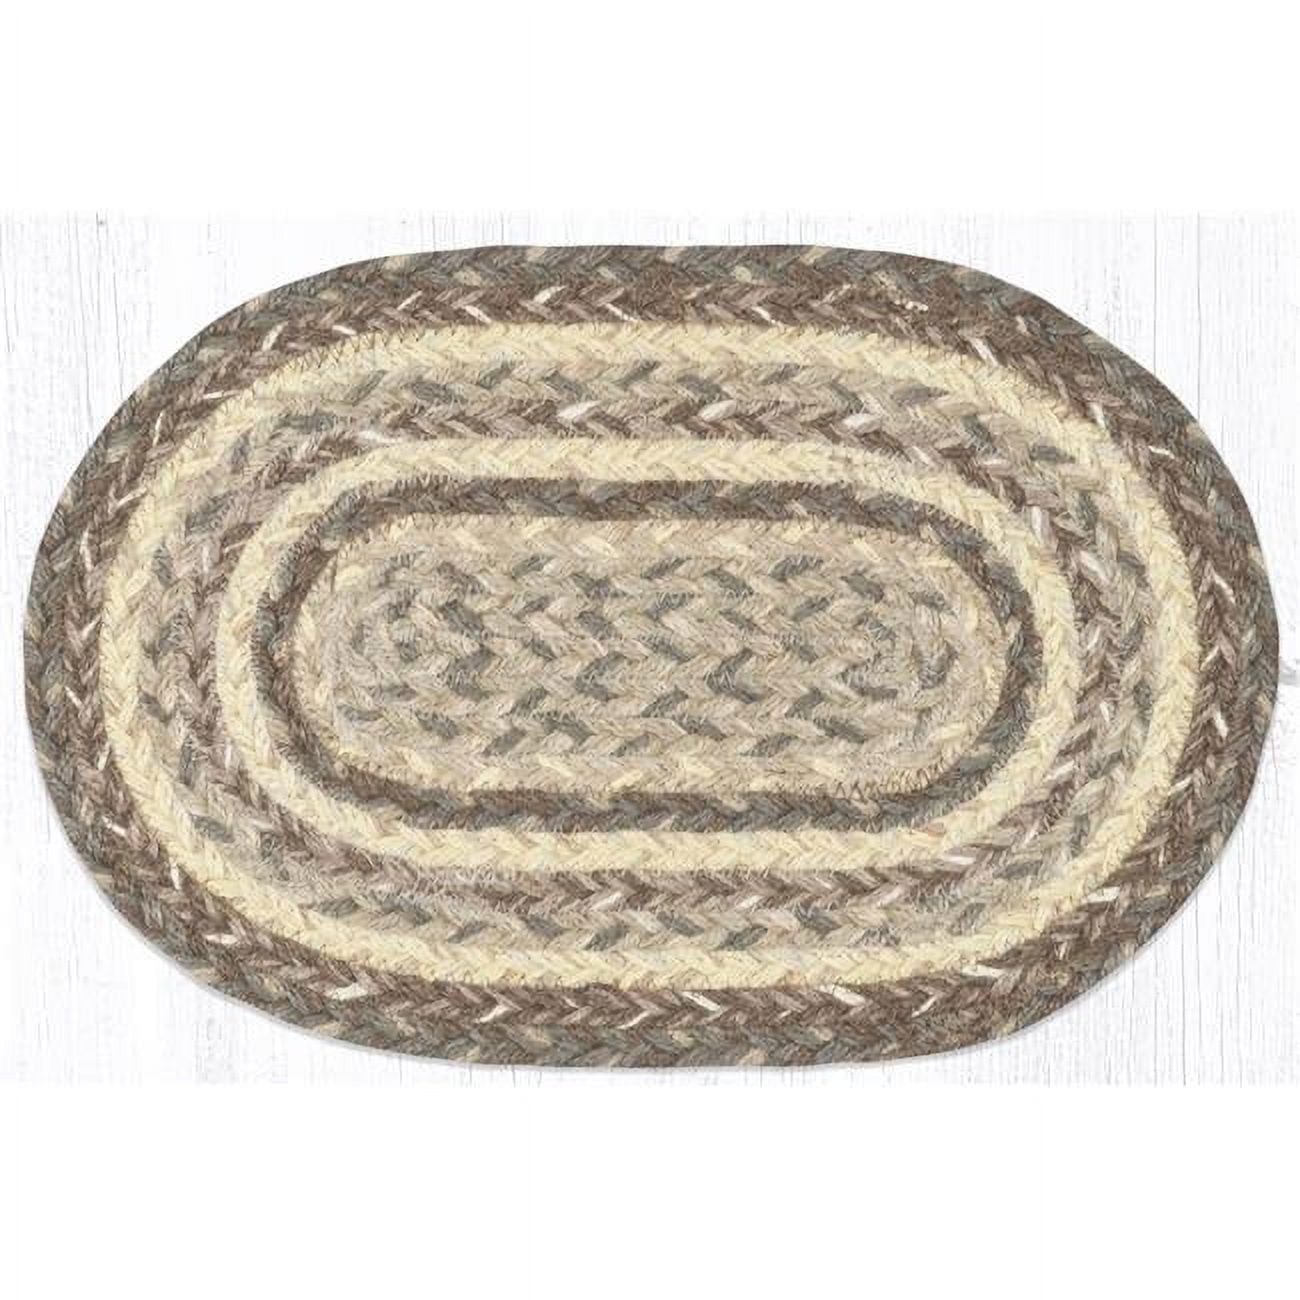 Capitol Importing 00-9-113 10 X 15 In. Ms 9-113 Khaki Oval Swatch